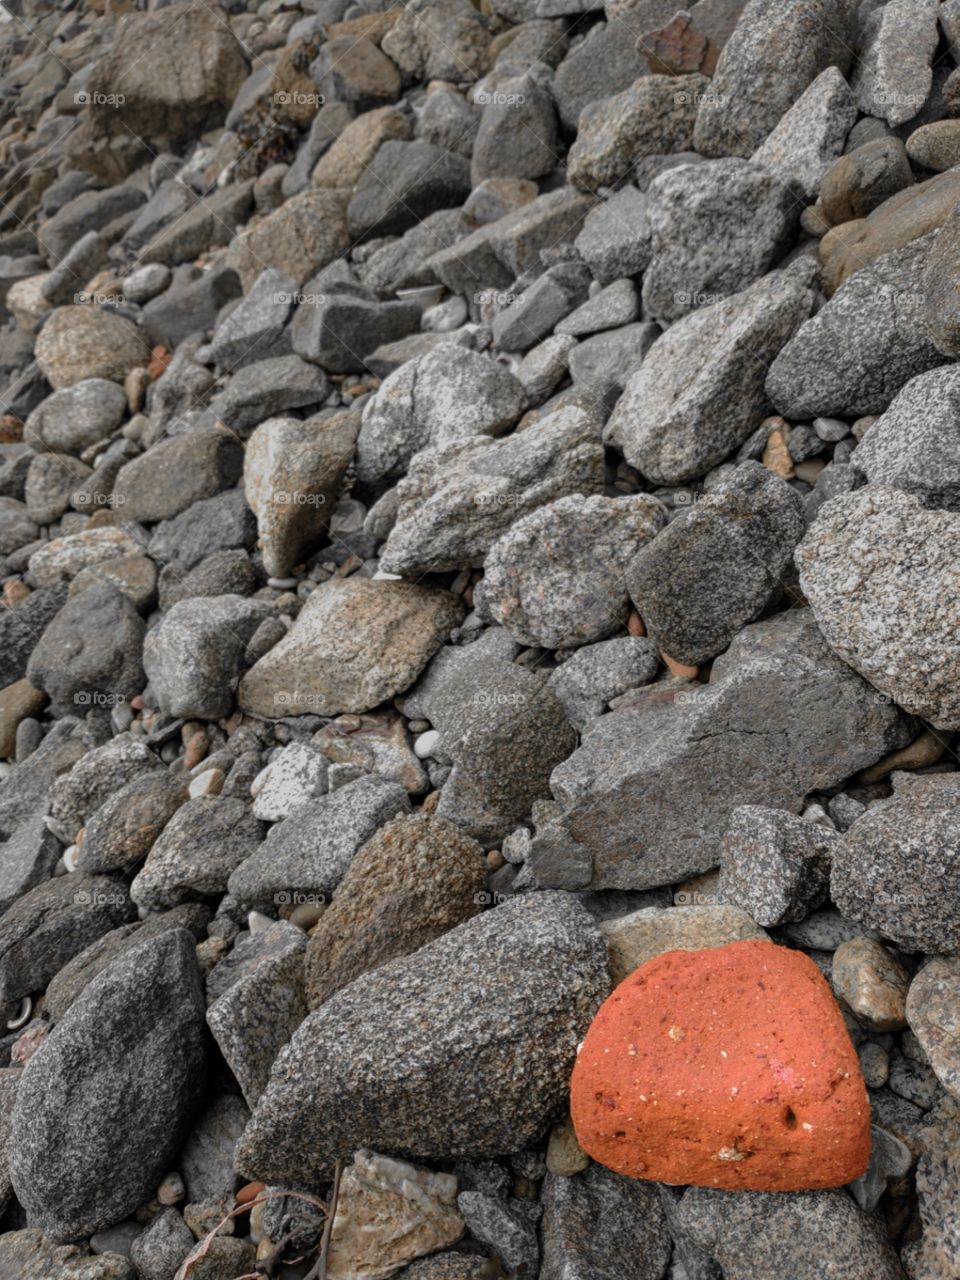 Red rock on a pebble beach.